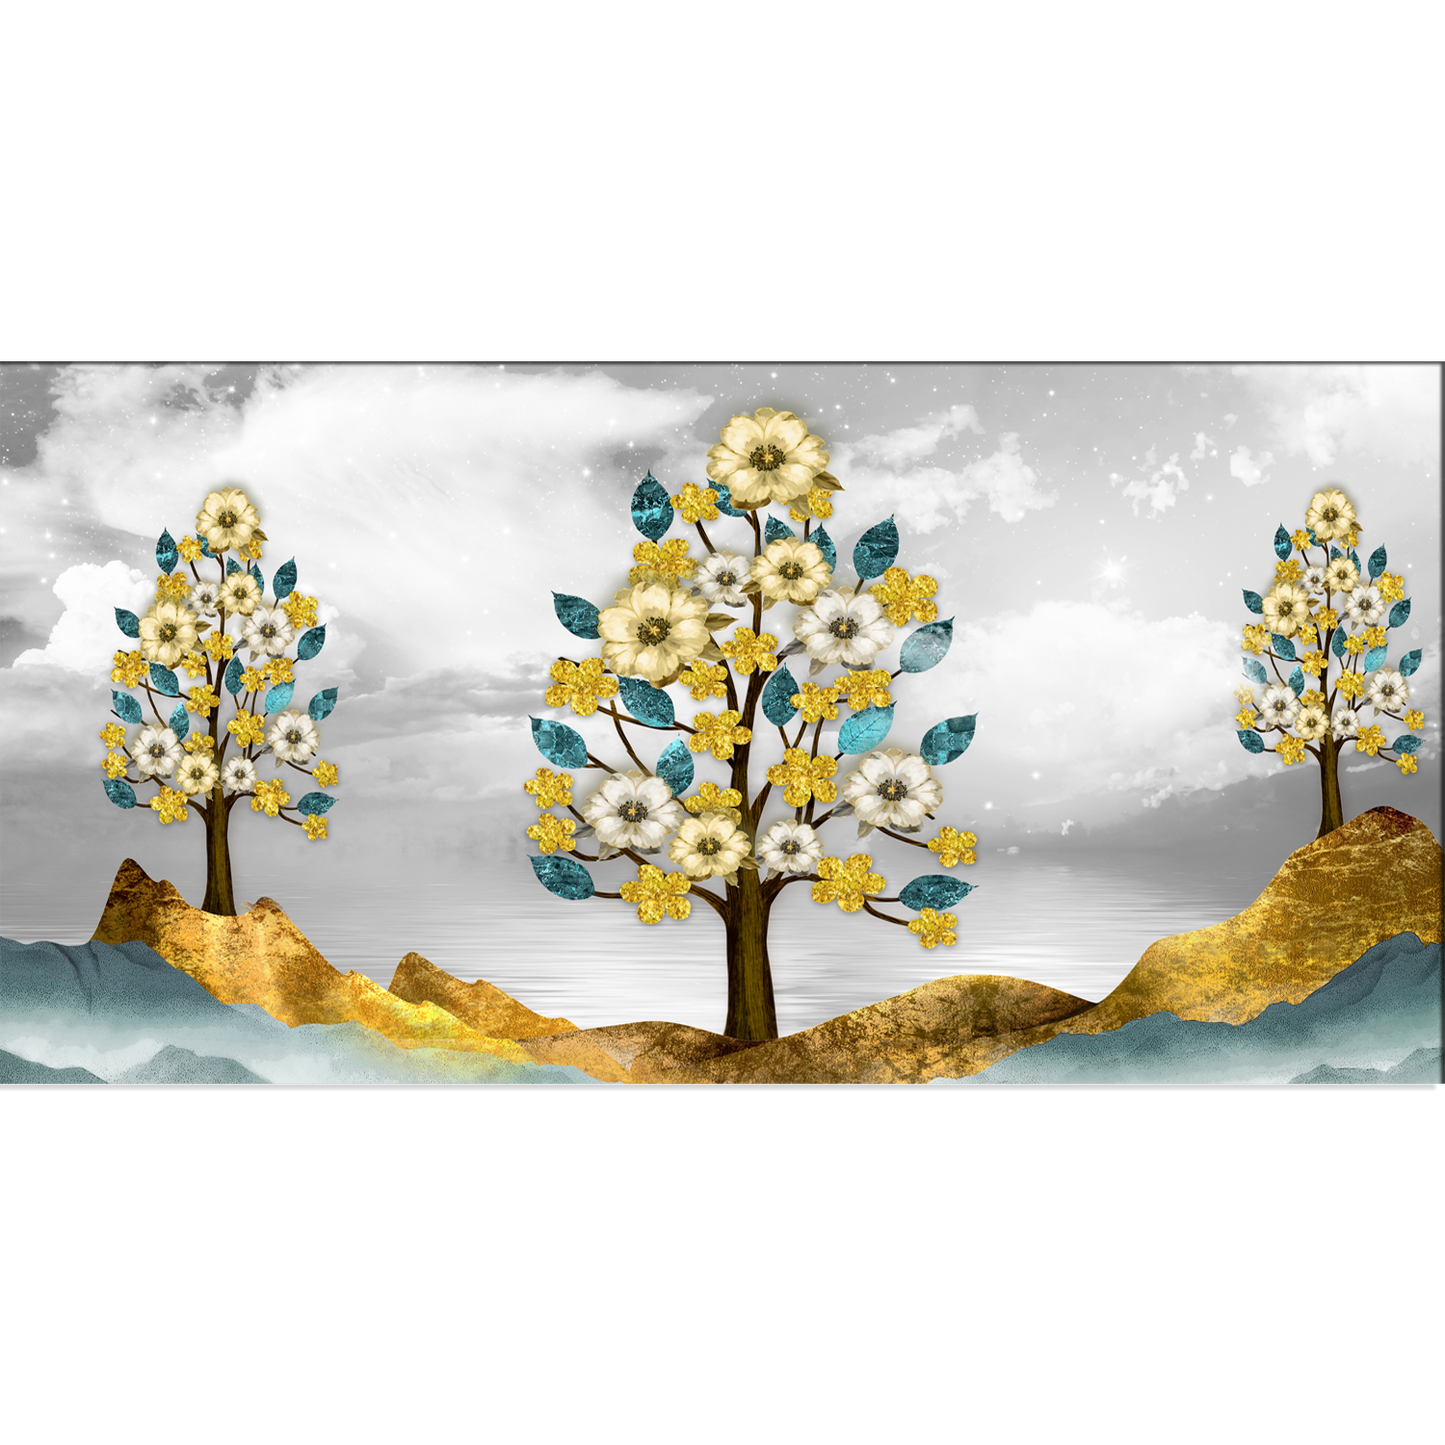 Brown trees with golden flowers Canvas Print Wall Painting